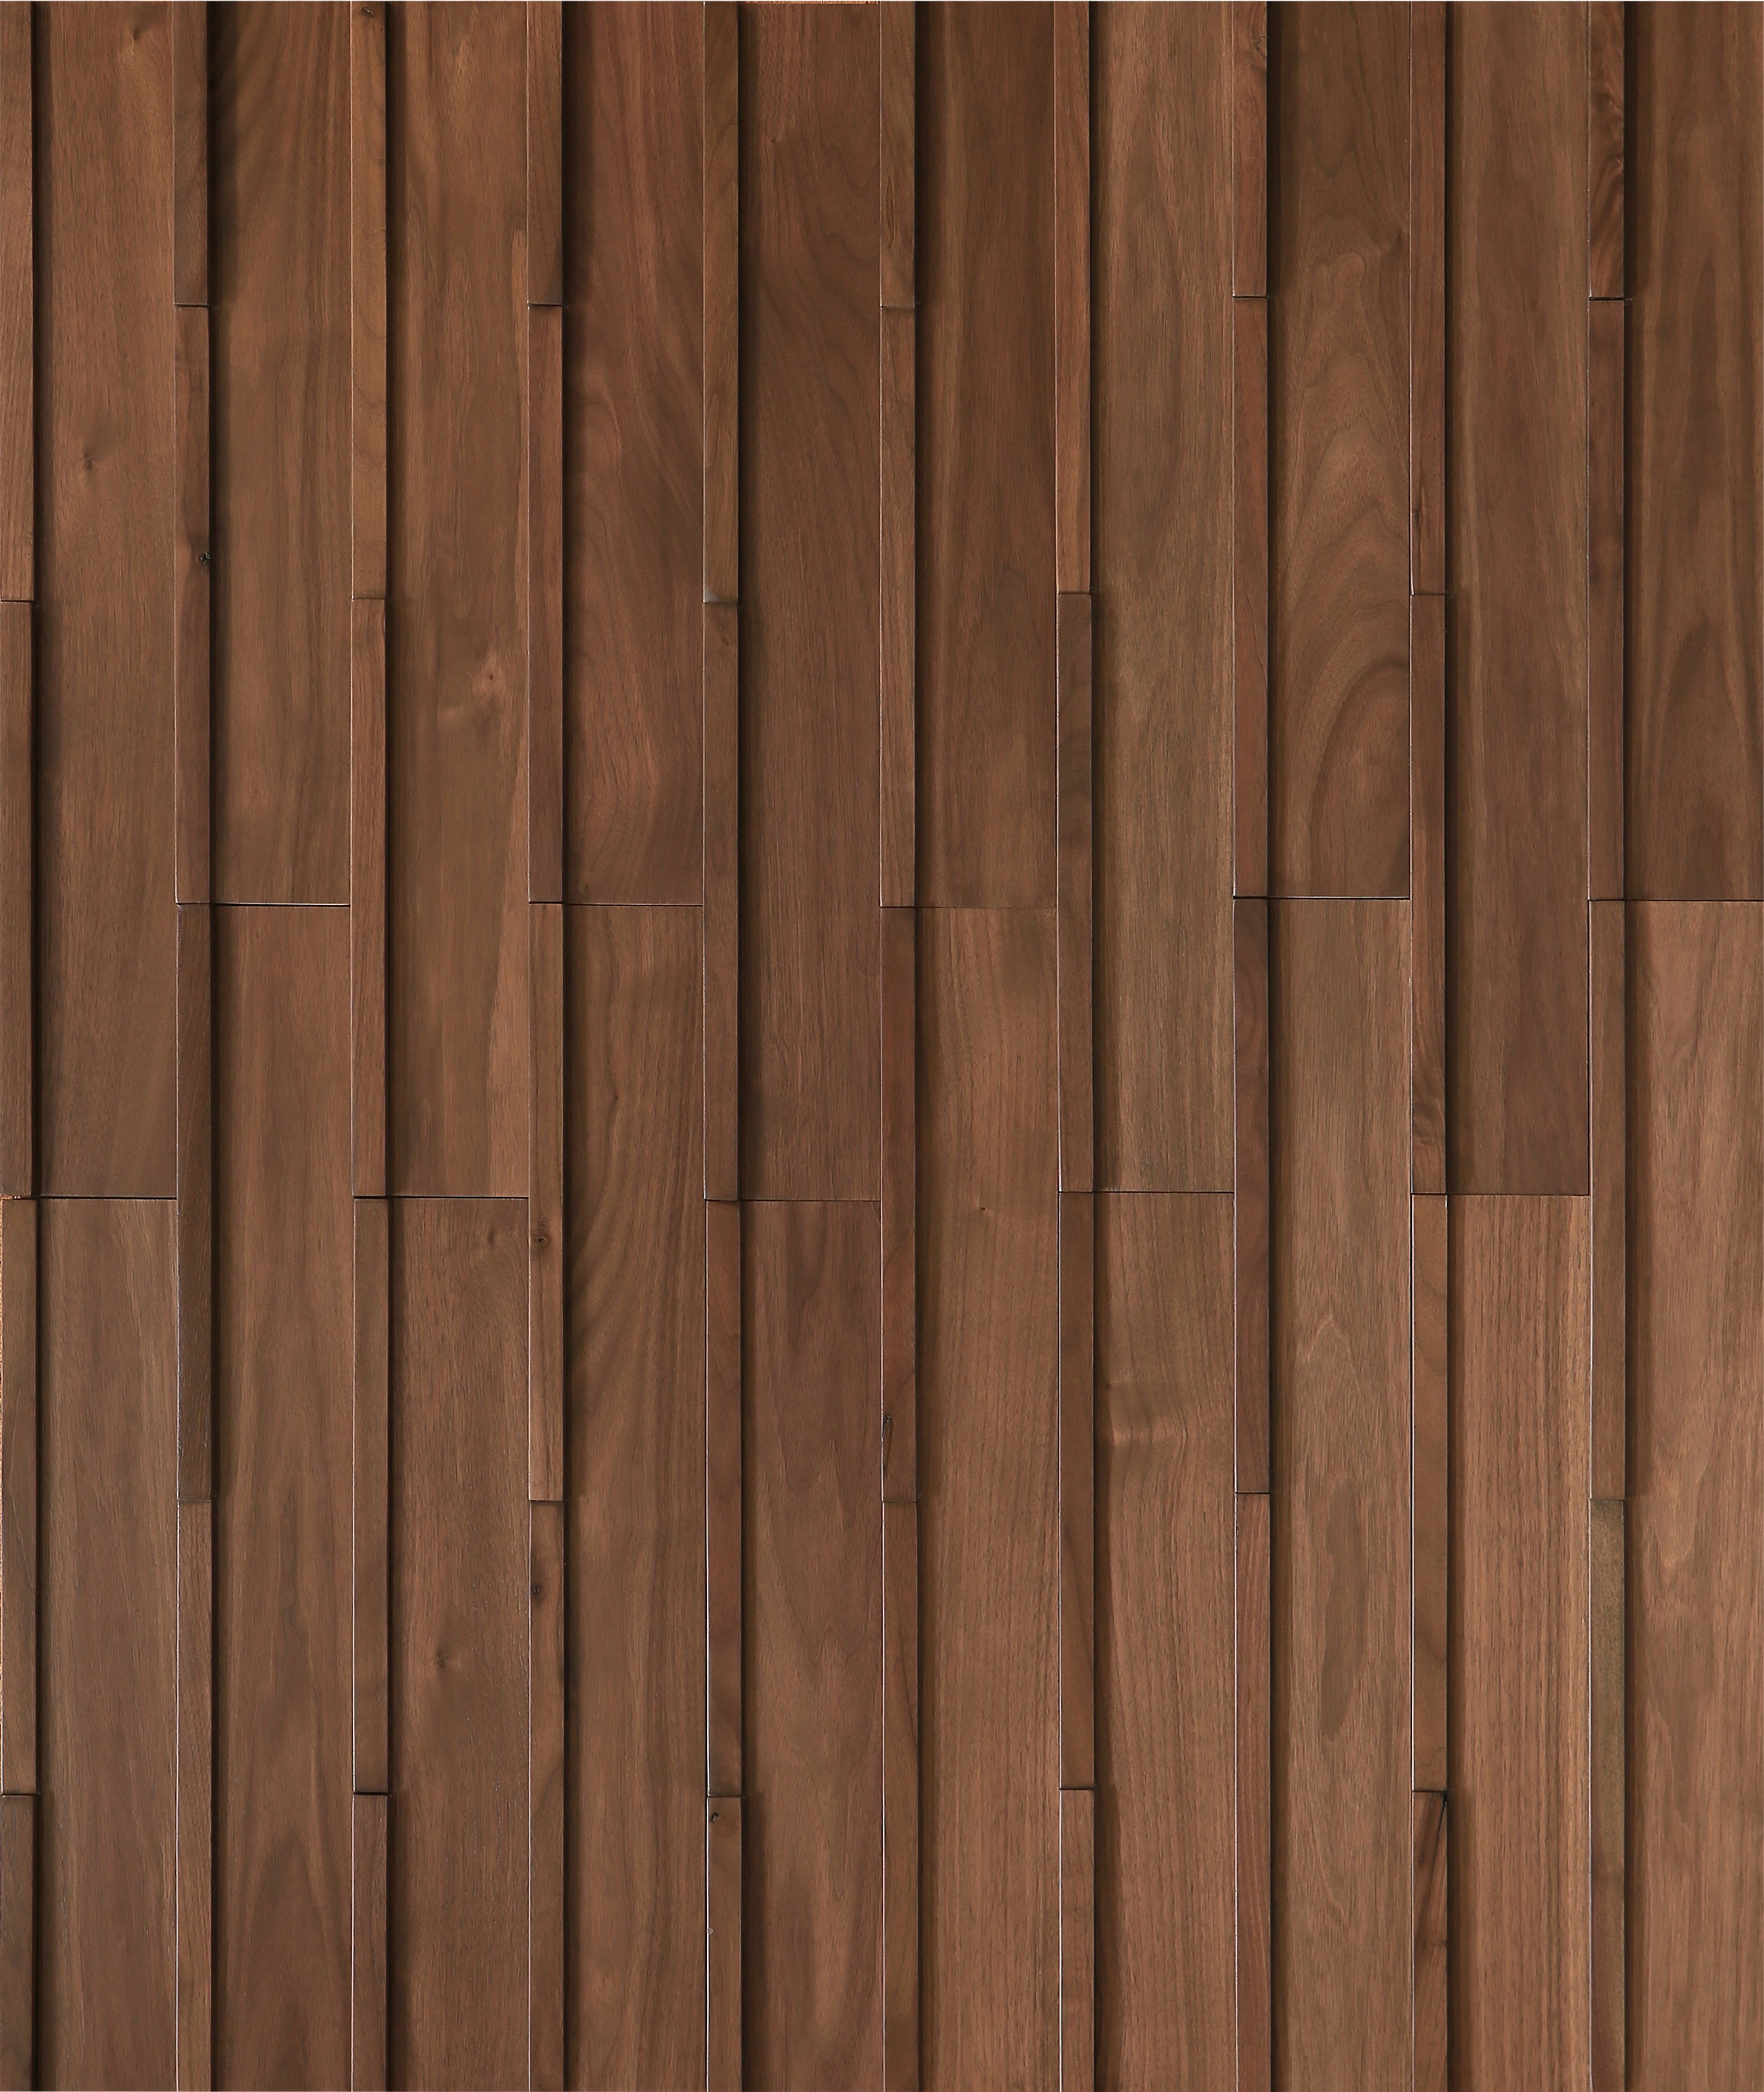 duchateau inceptiv kubik stout walnut three dimensional wall natural wood panel conversion varnish for interior use distributed by surface group international